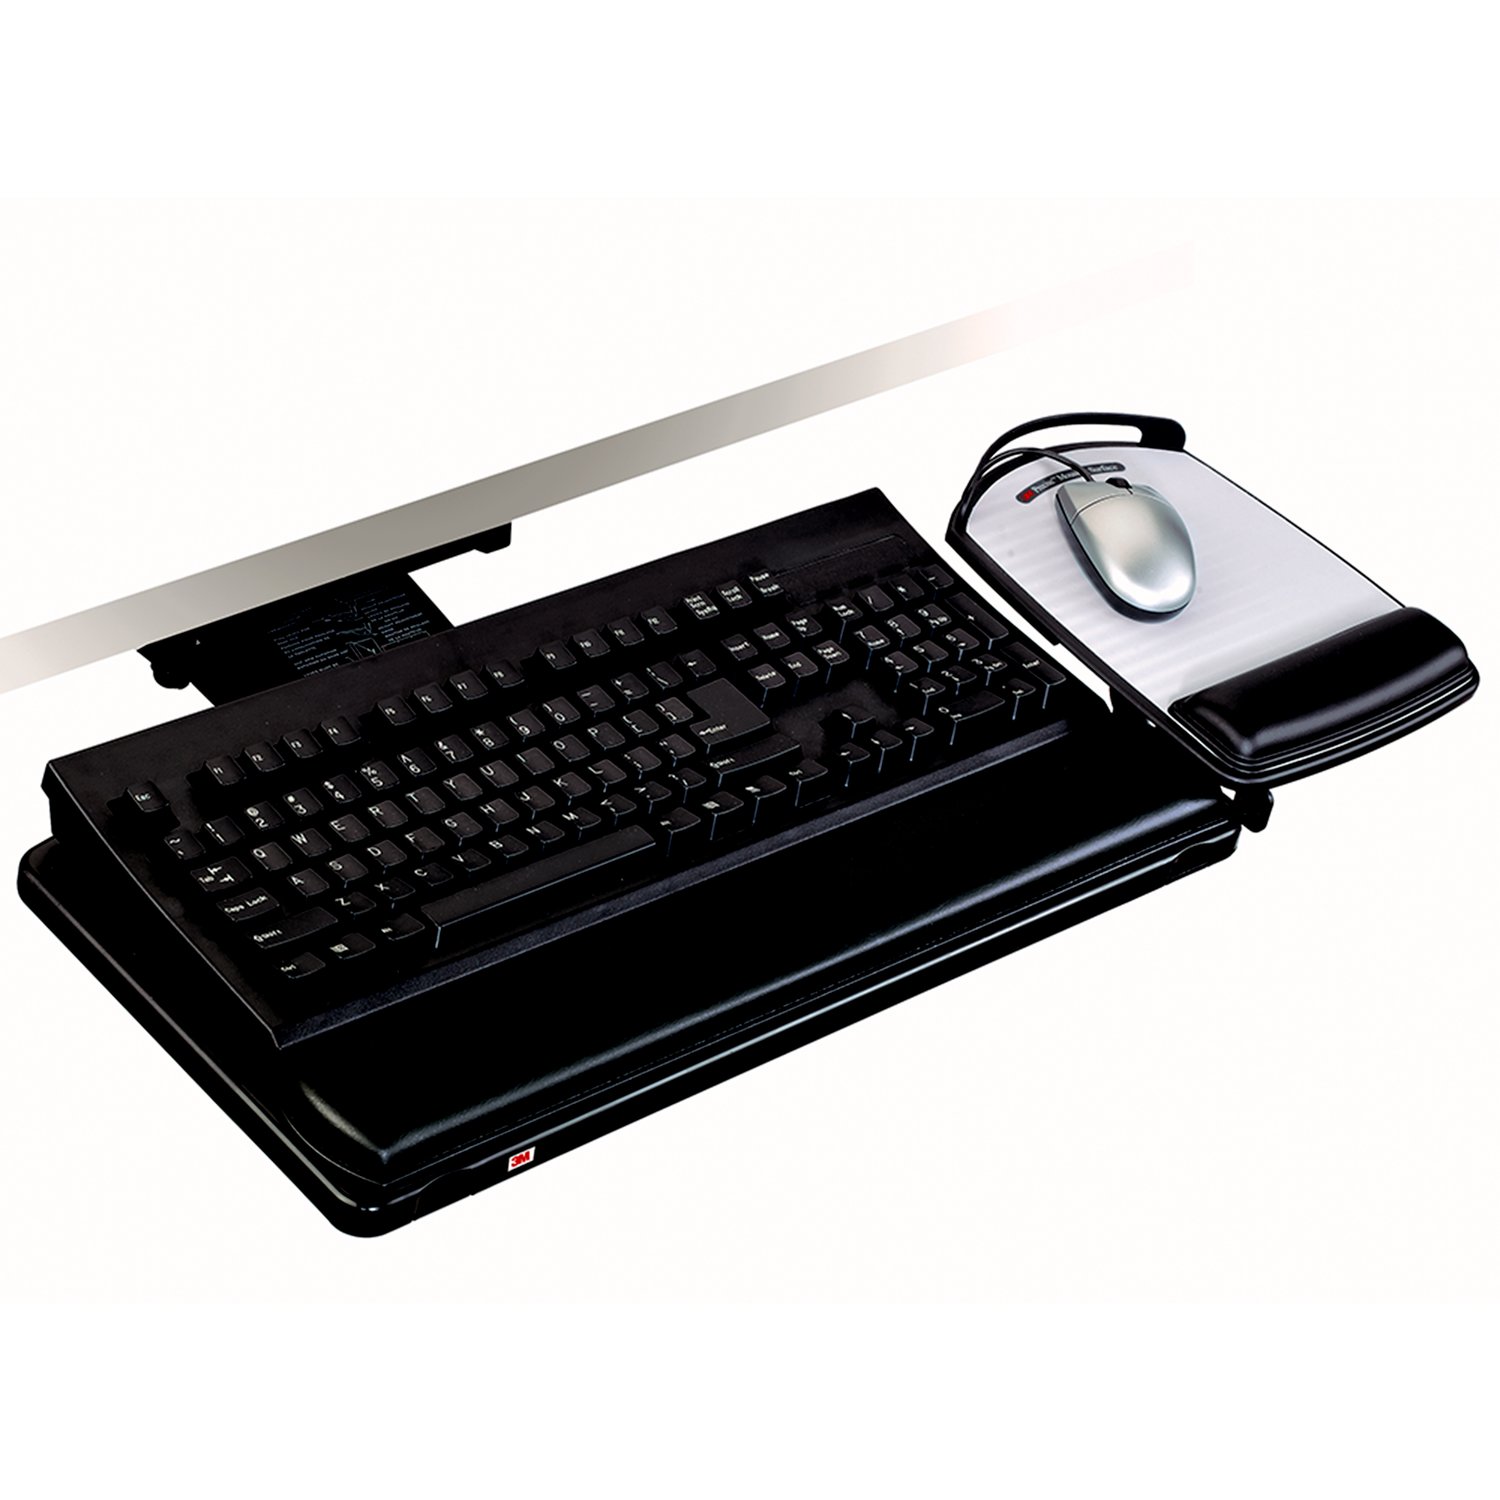 7010332574 - 3M Knob Adjust Keyboard Tray with Adjustable Keyboard and Mouse
Platform, 17.75 in Track, AKT80LE